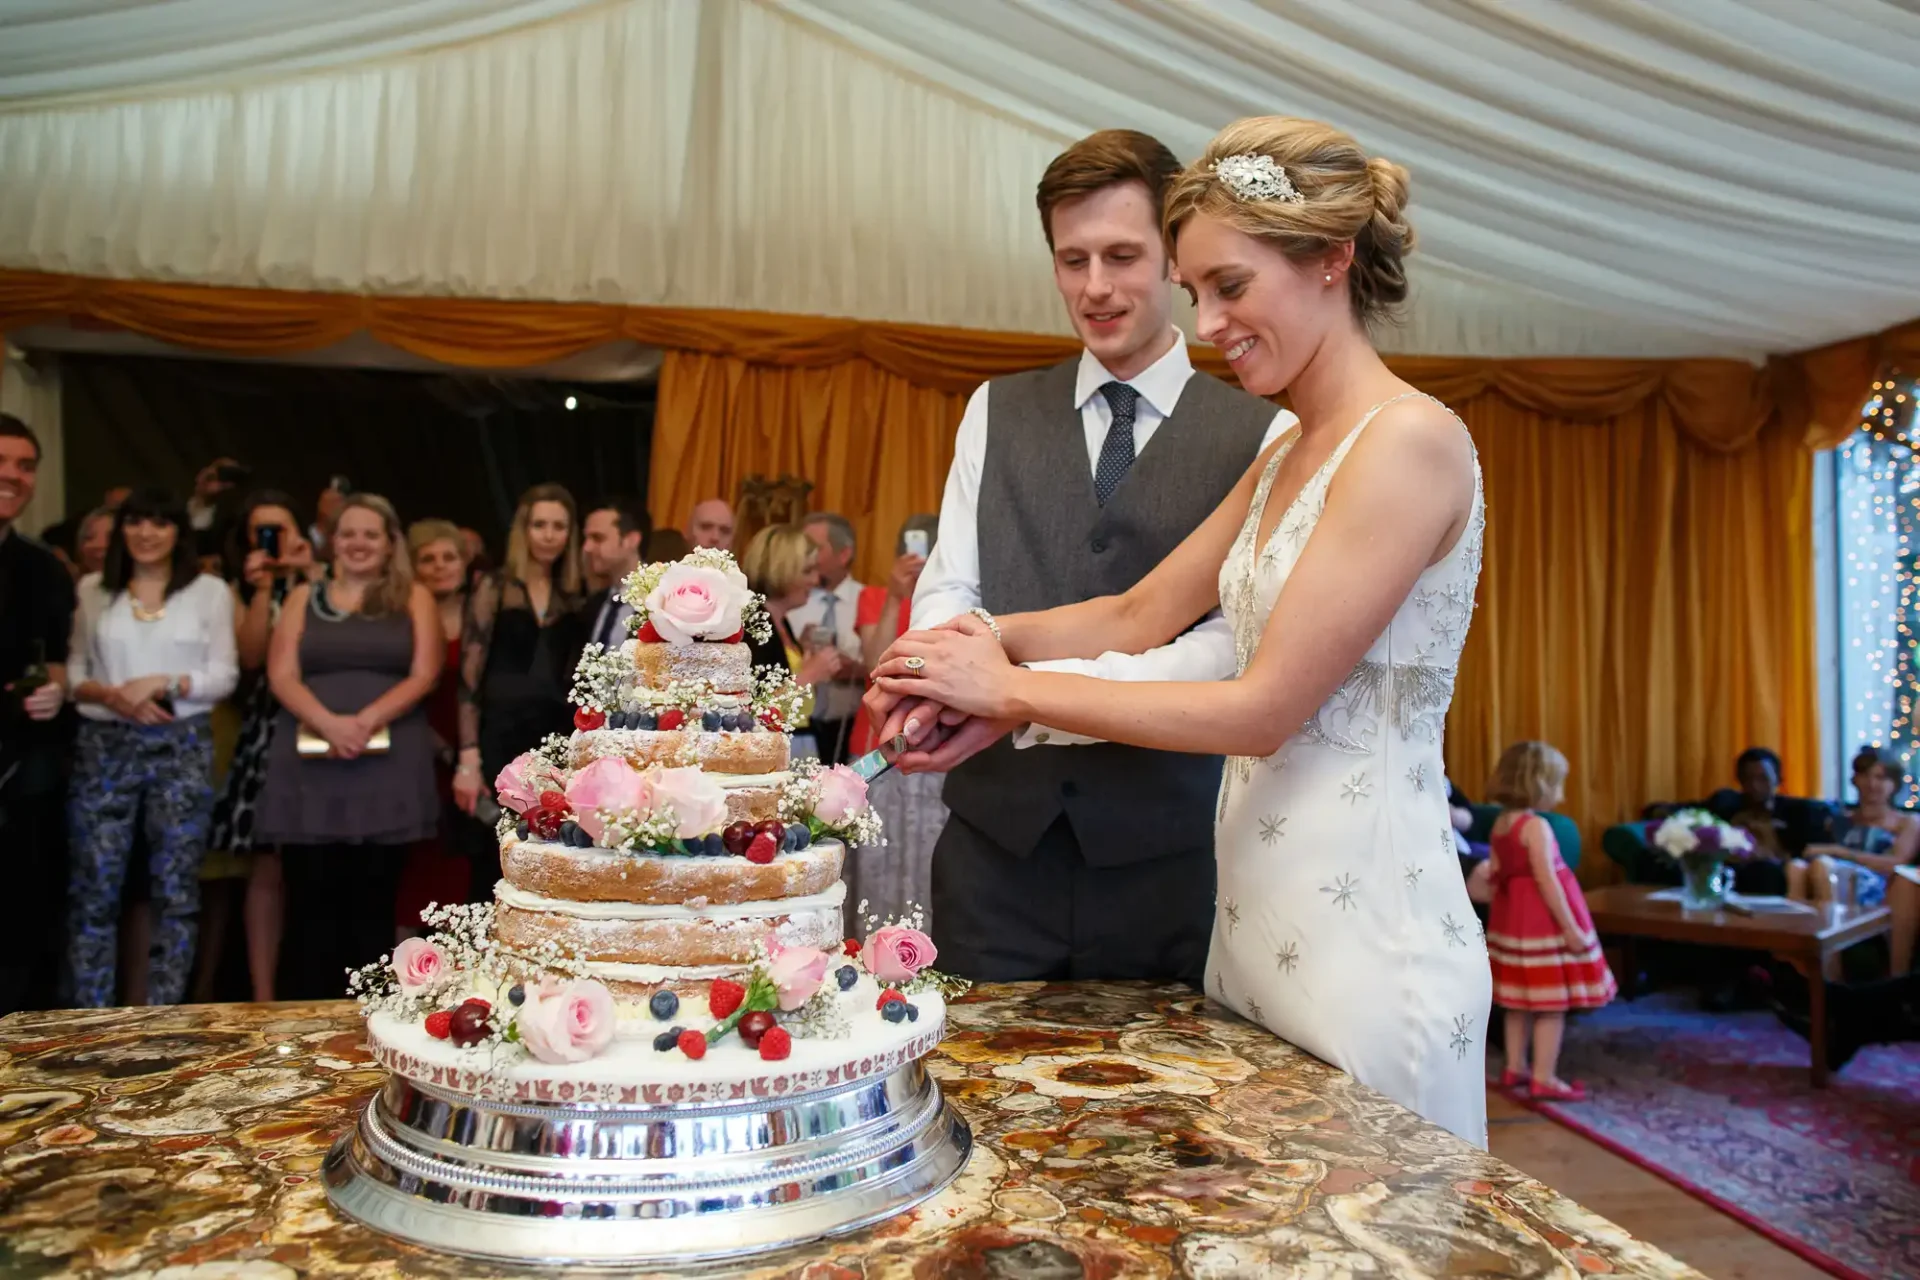 A newlywed couple cuts a multi-tiered wedding cake adorned with pink roses, surrounded by guests in a festively decorated tent.